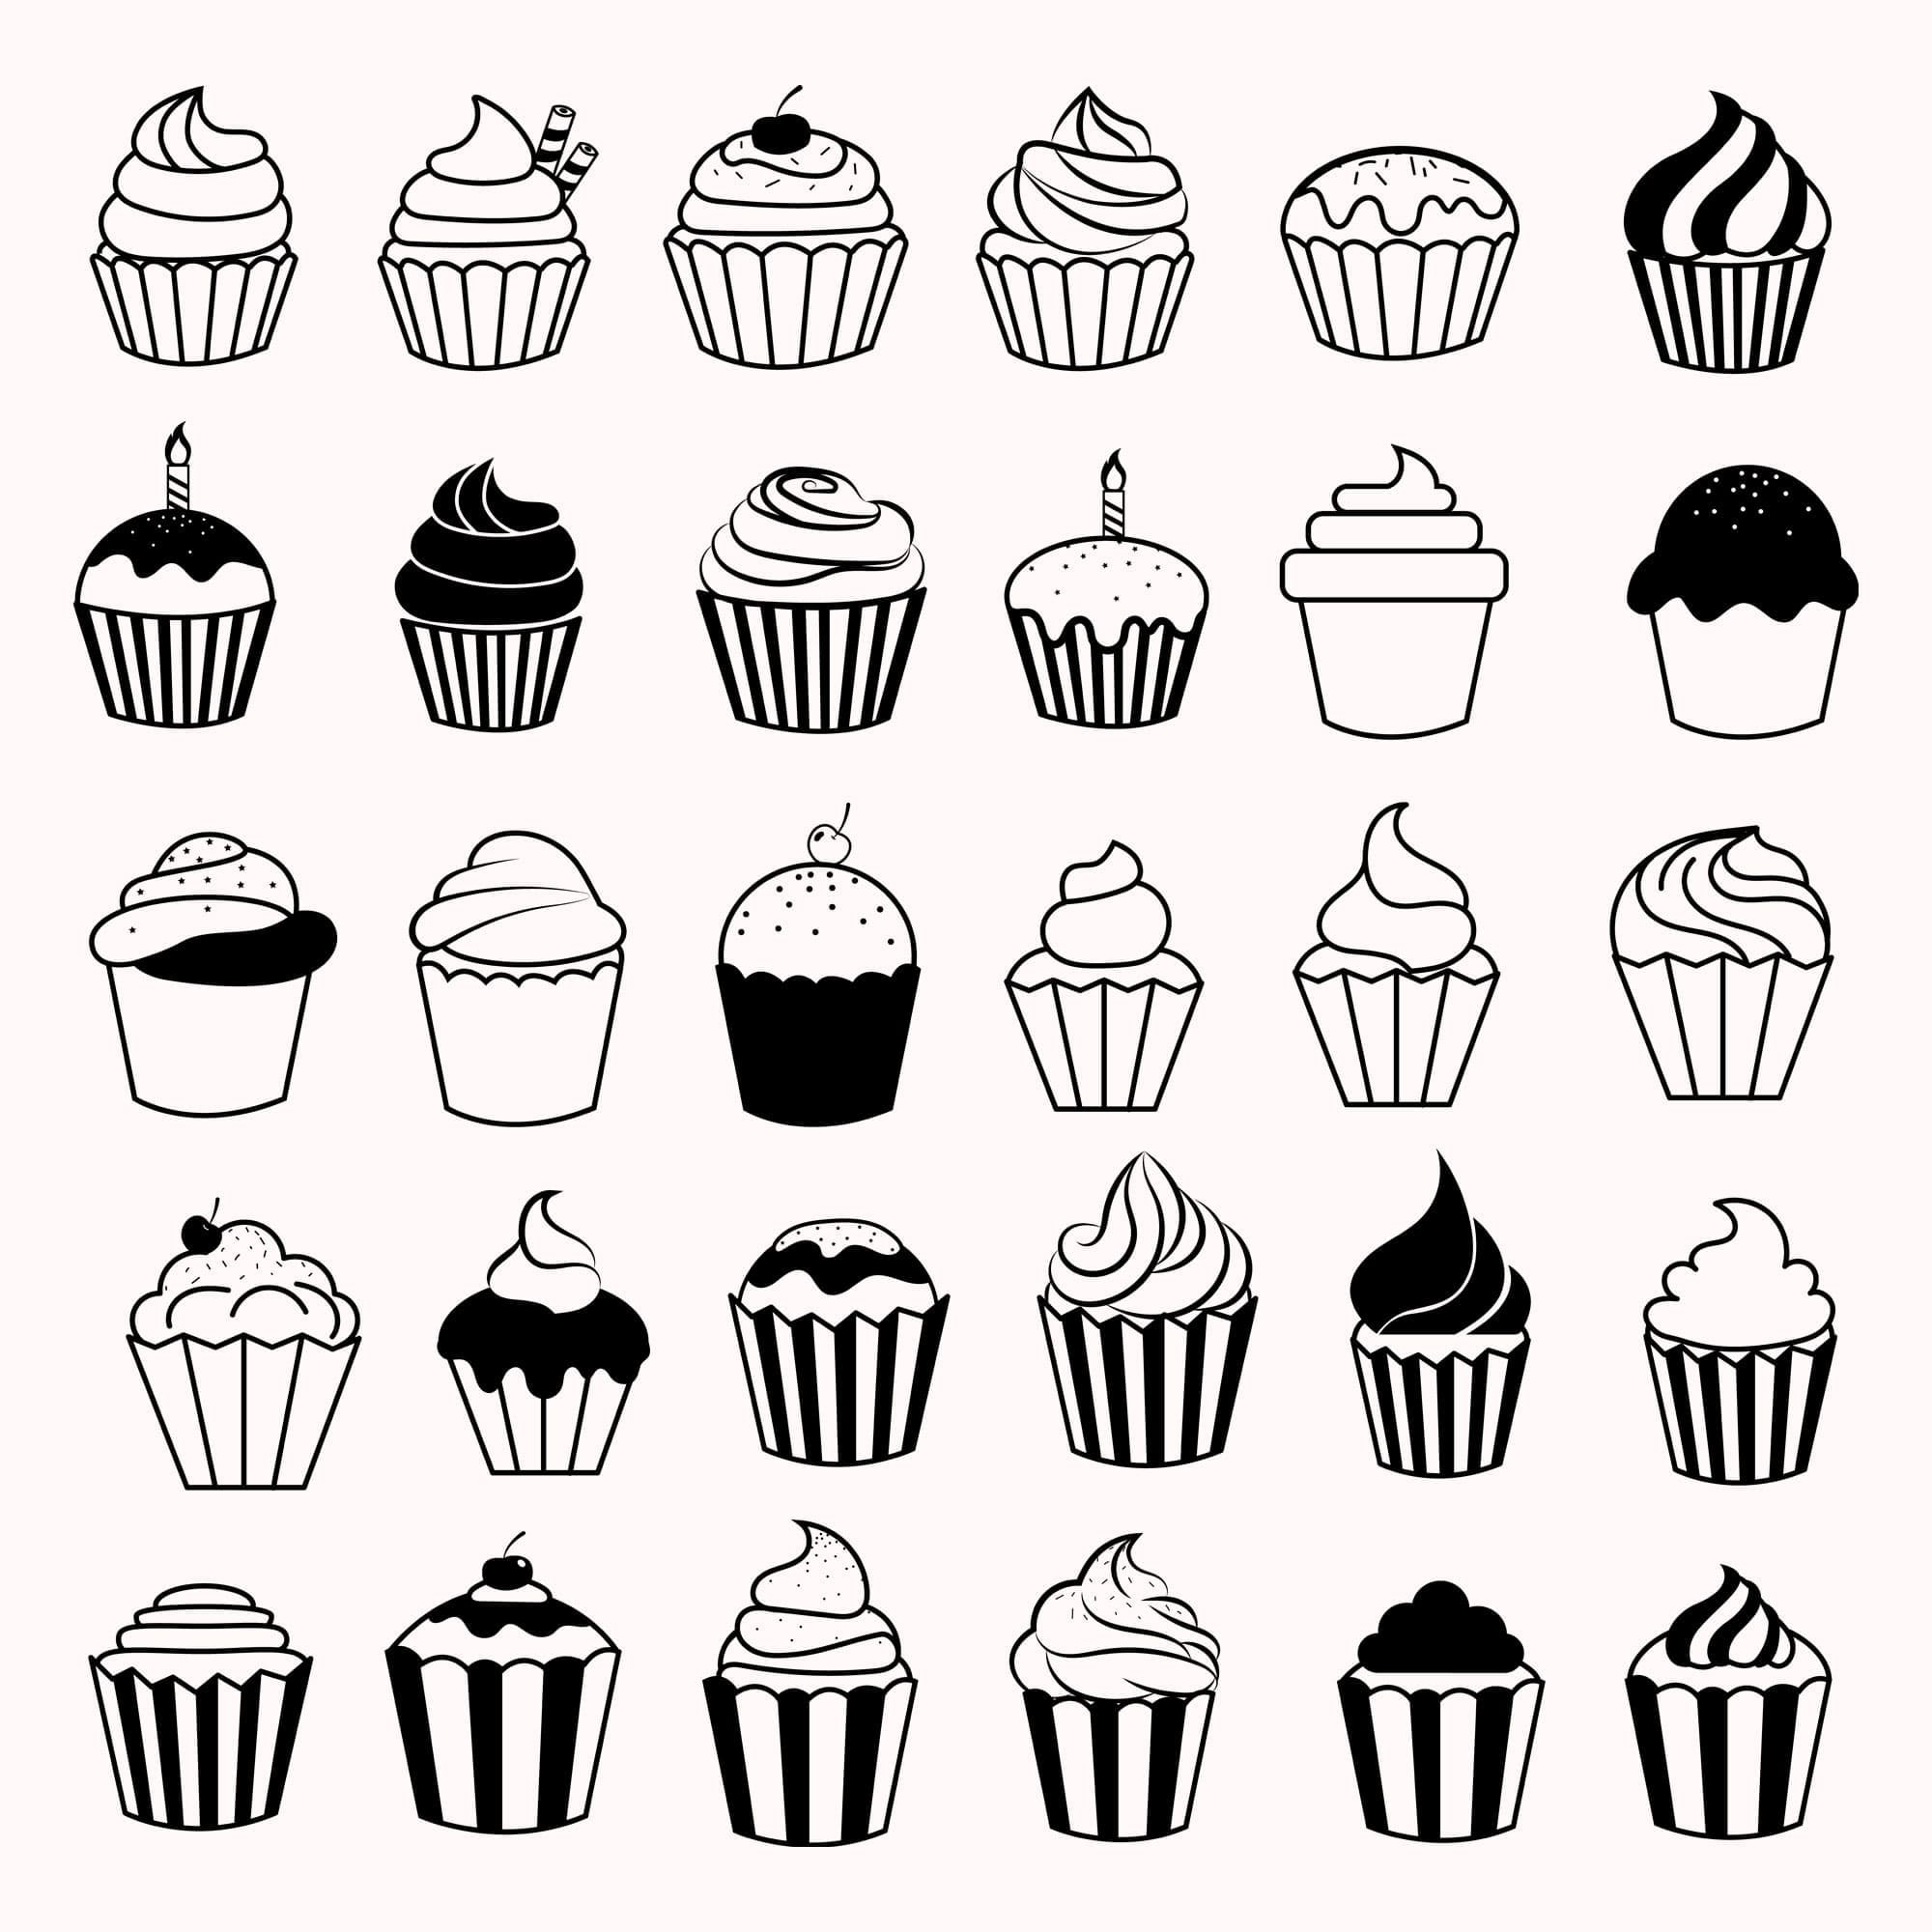 Cupcakes with delicate cream are painted in black and white colors.